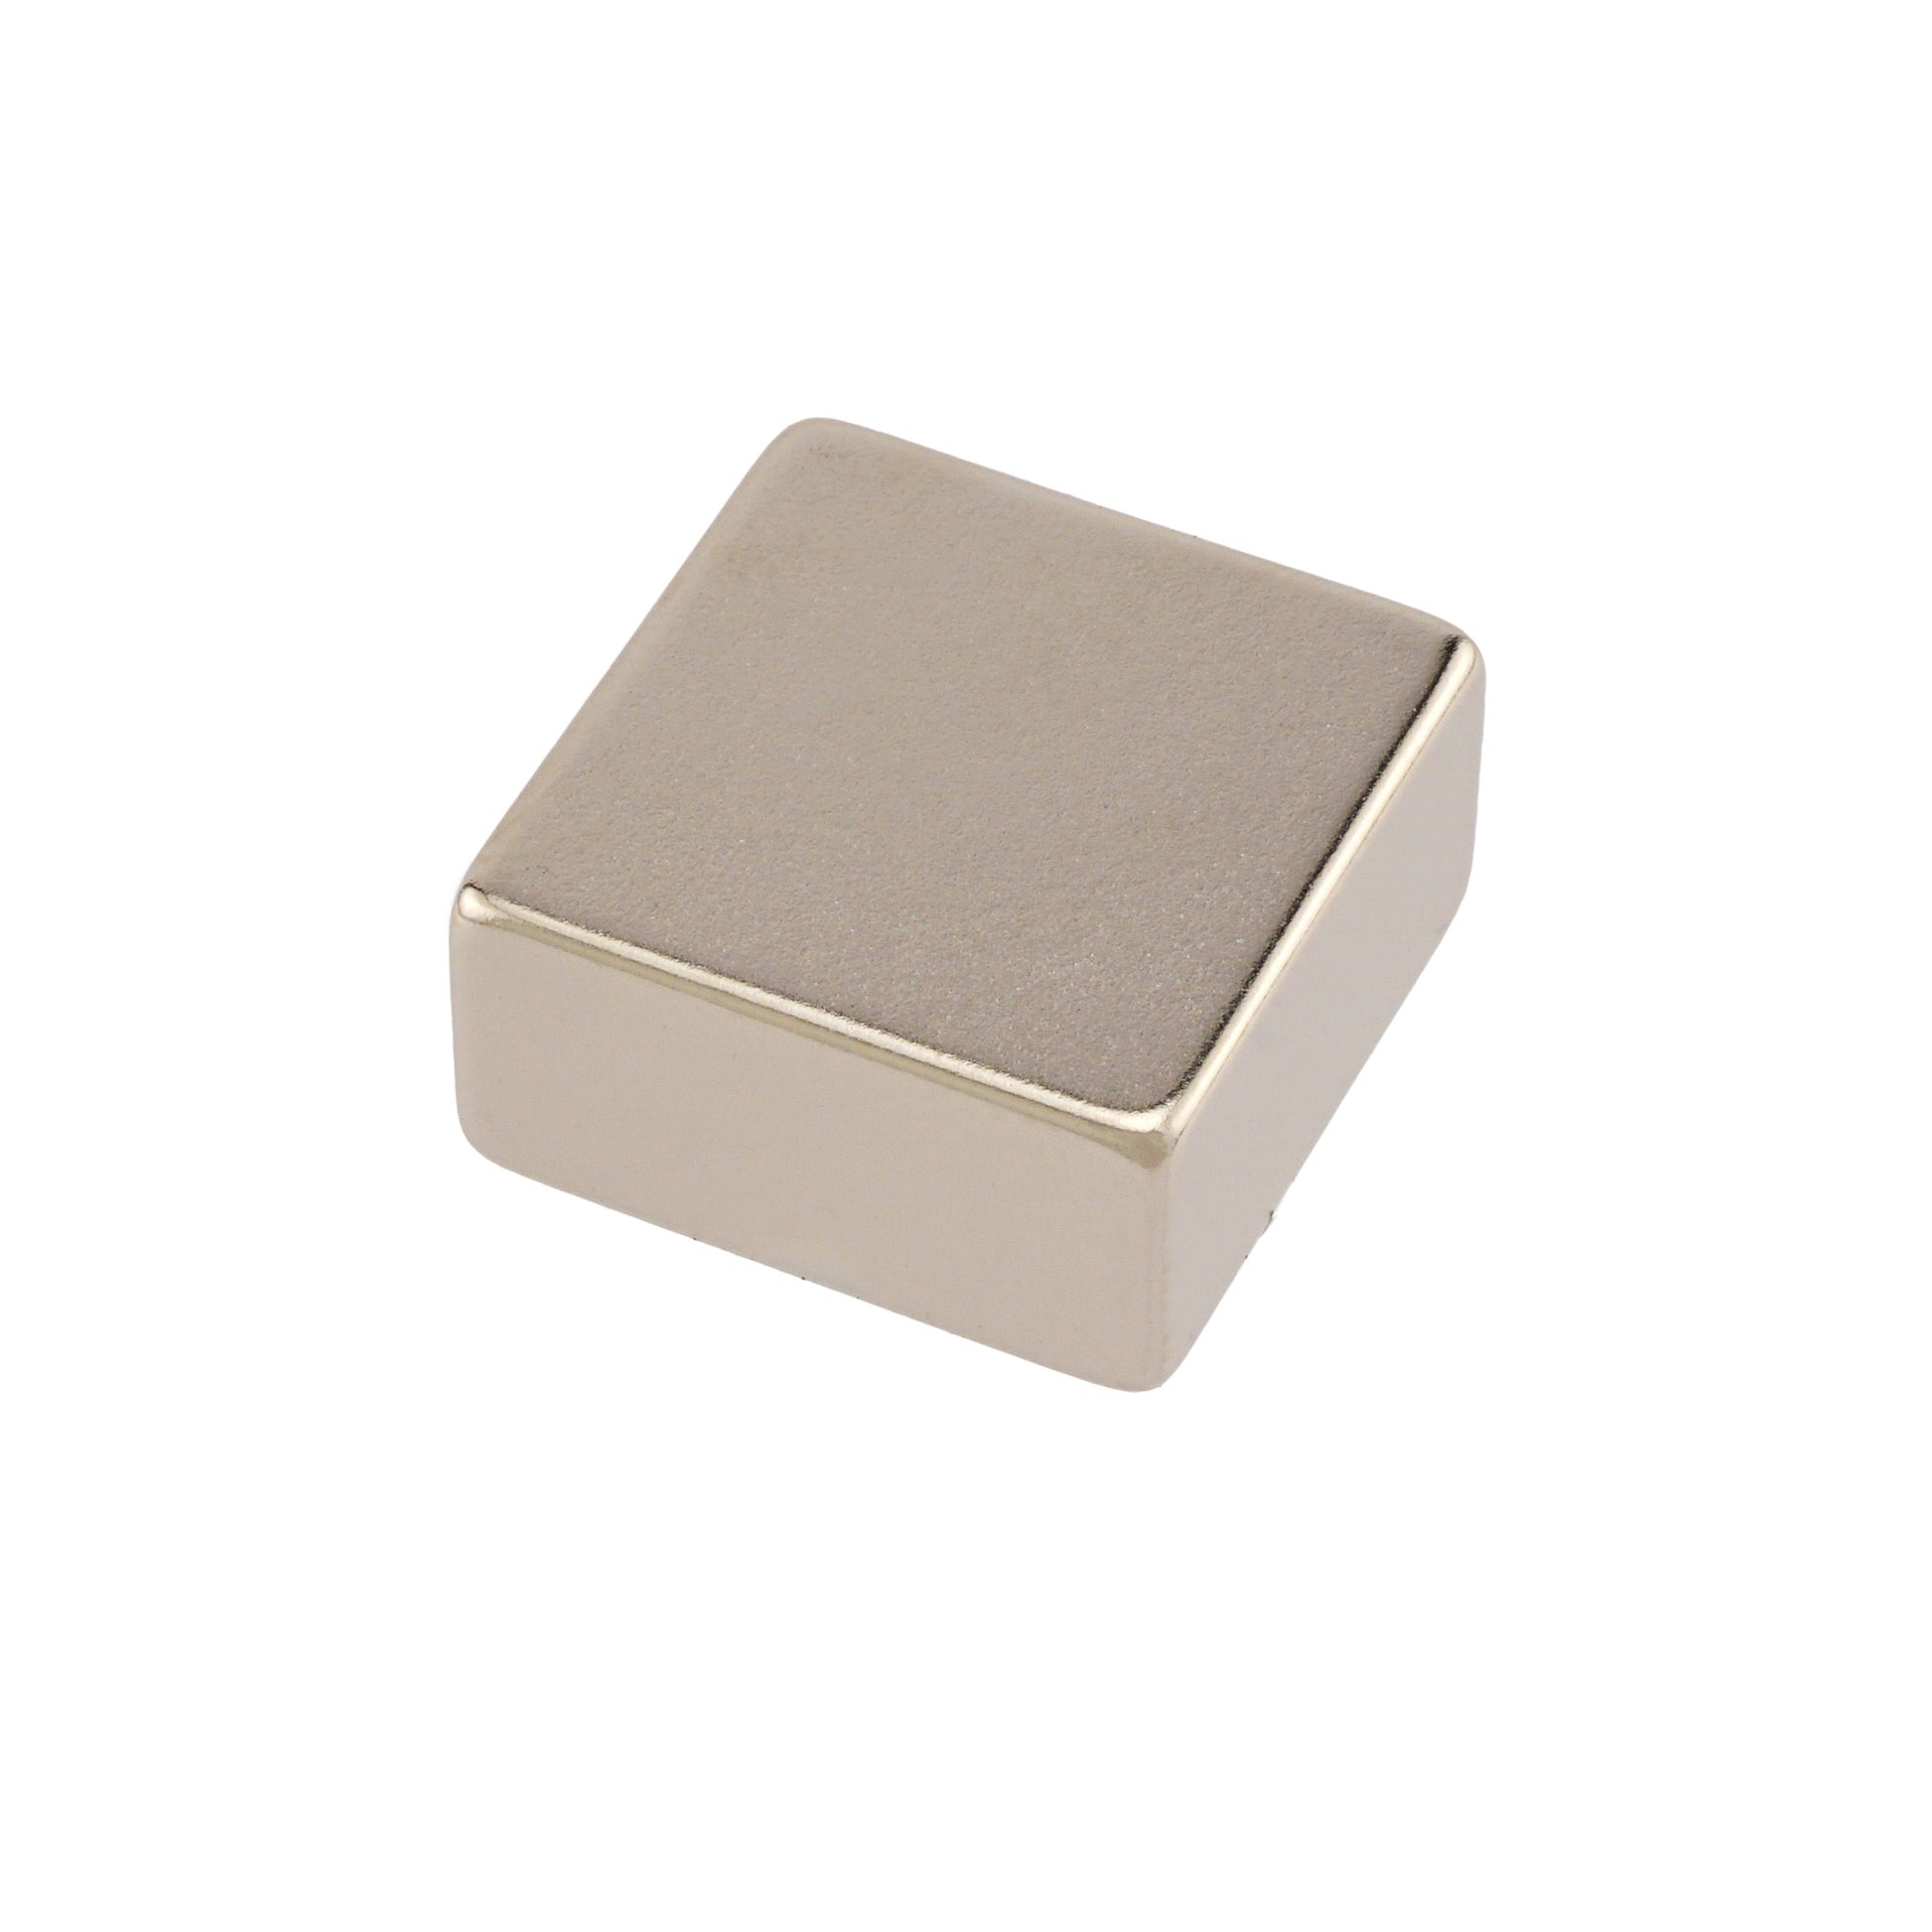 Load image into Gallery viewer, NB006N-35 Neodymium Block Magnet - 45 Degree Angle View